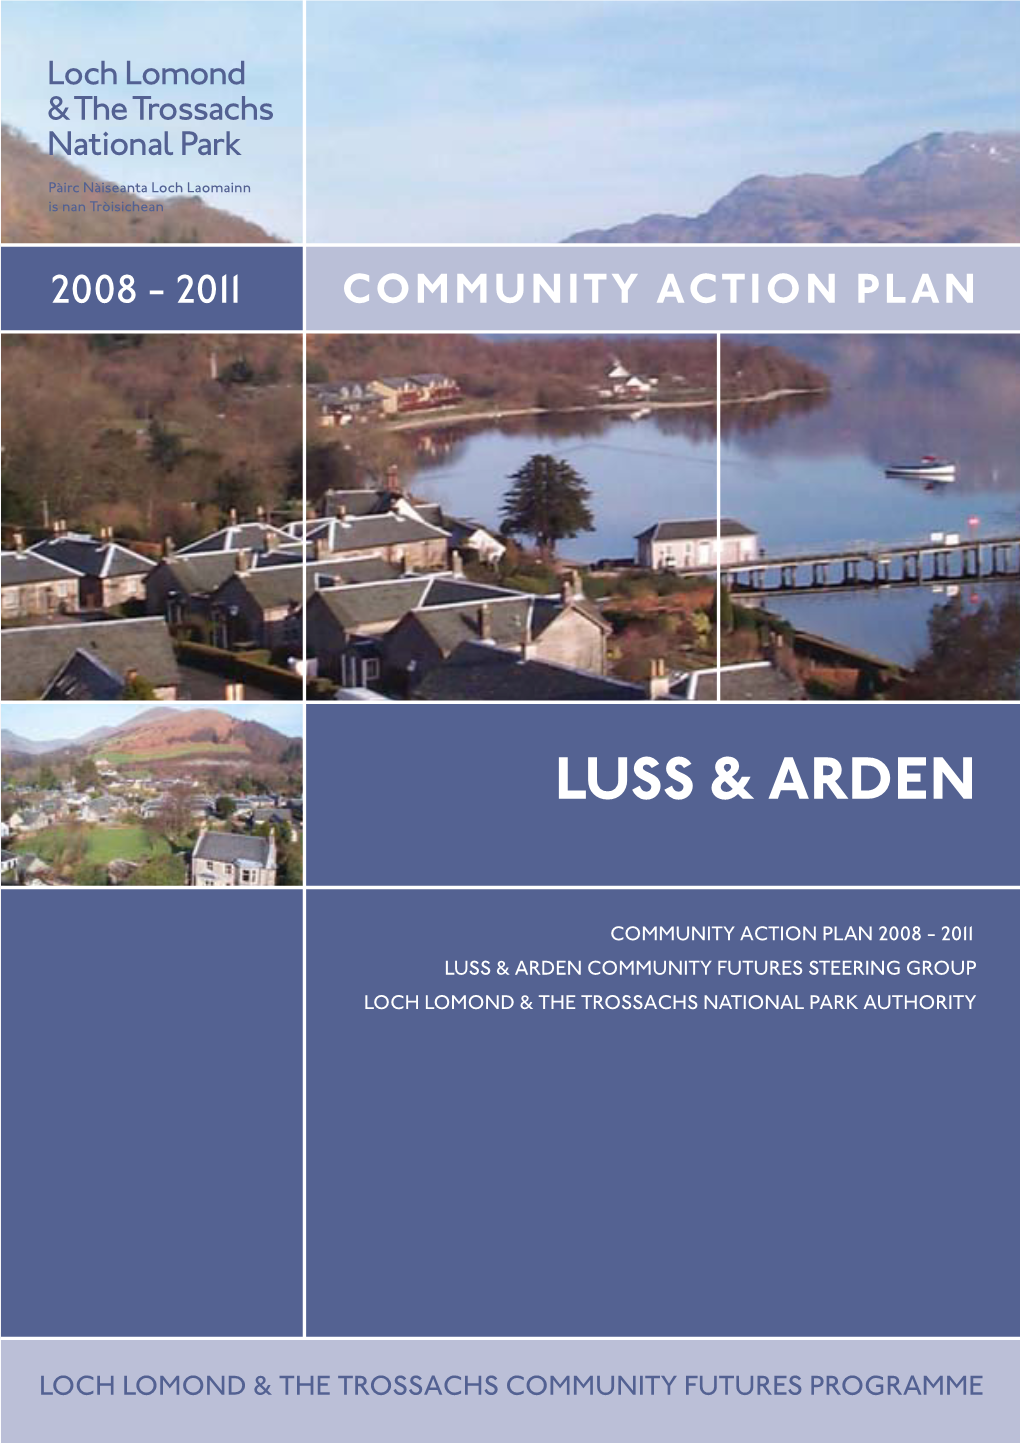 Luss 2 Action Plan 16Pp 19/6/08 12:27 Page 1